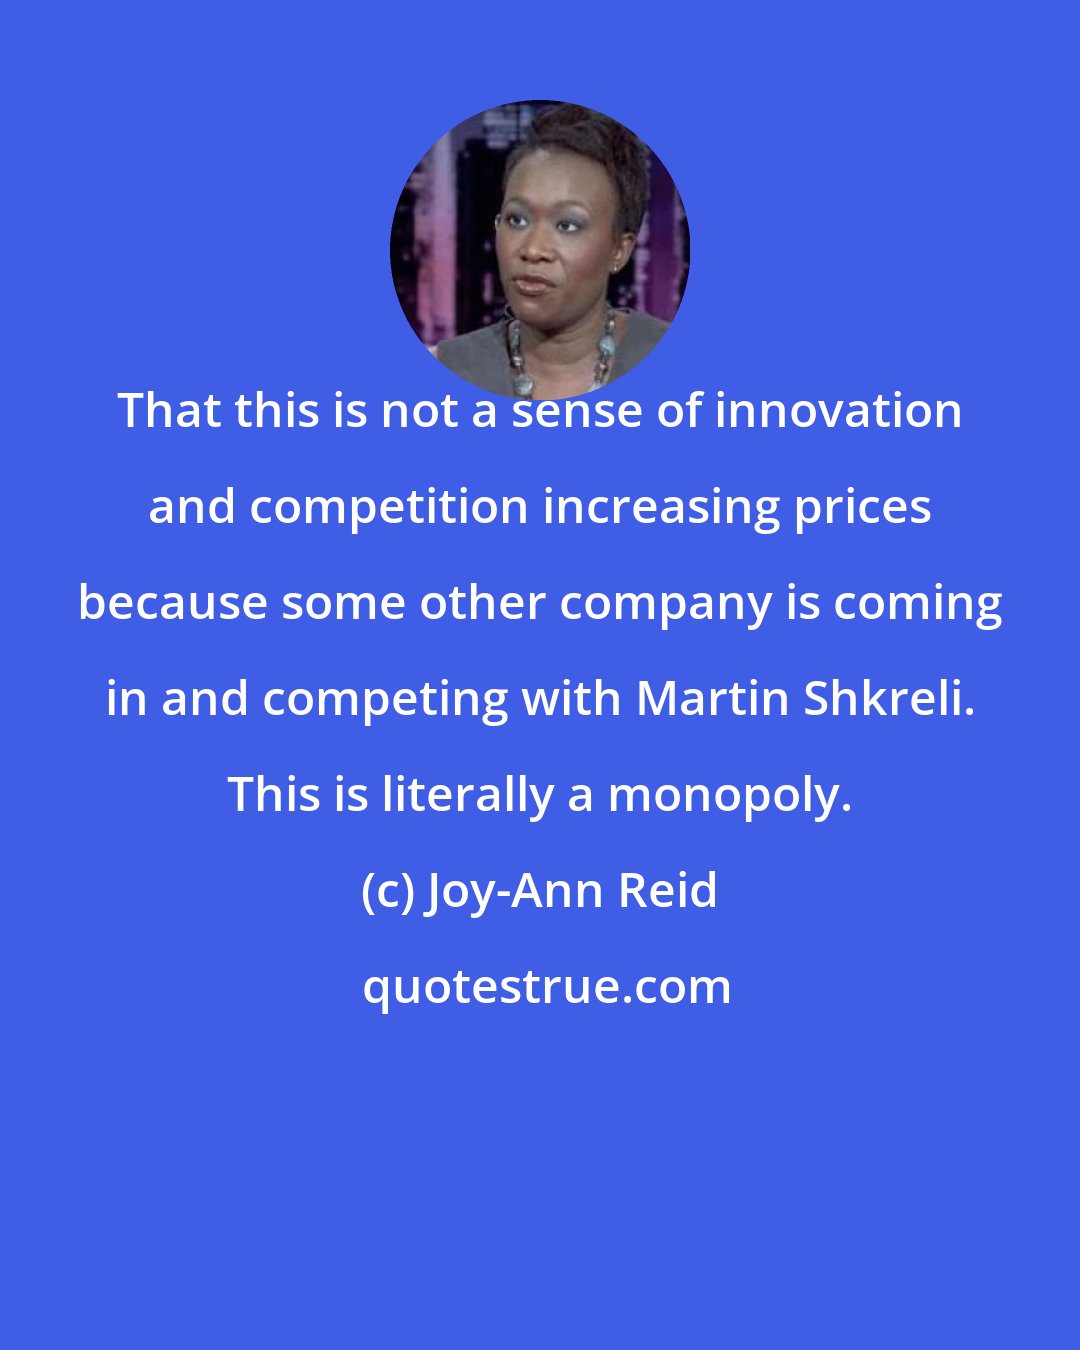 Joy-Ann Reid: That this is not a sense of innovation and competition increasing prices because some other company is coming in and competing with Martin Shkreli. This is literally a monopoly.